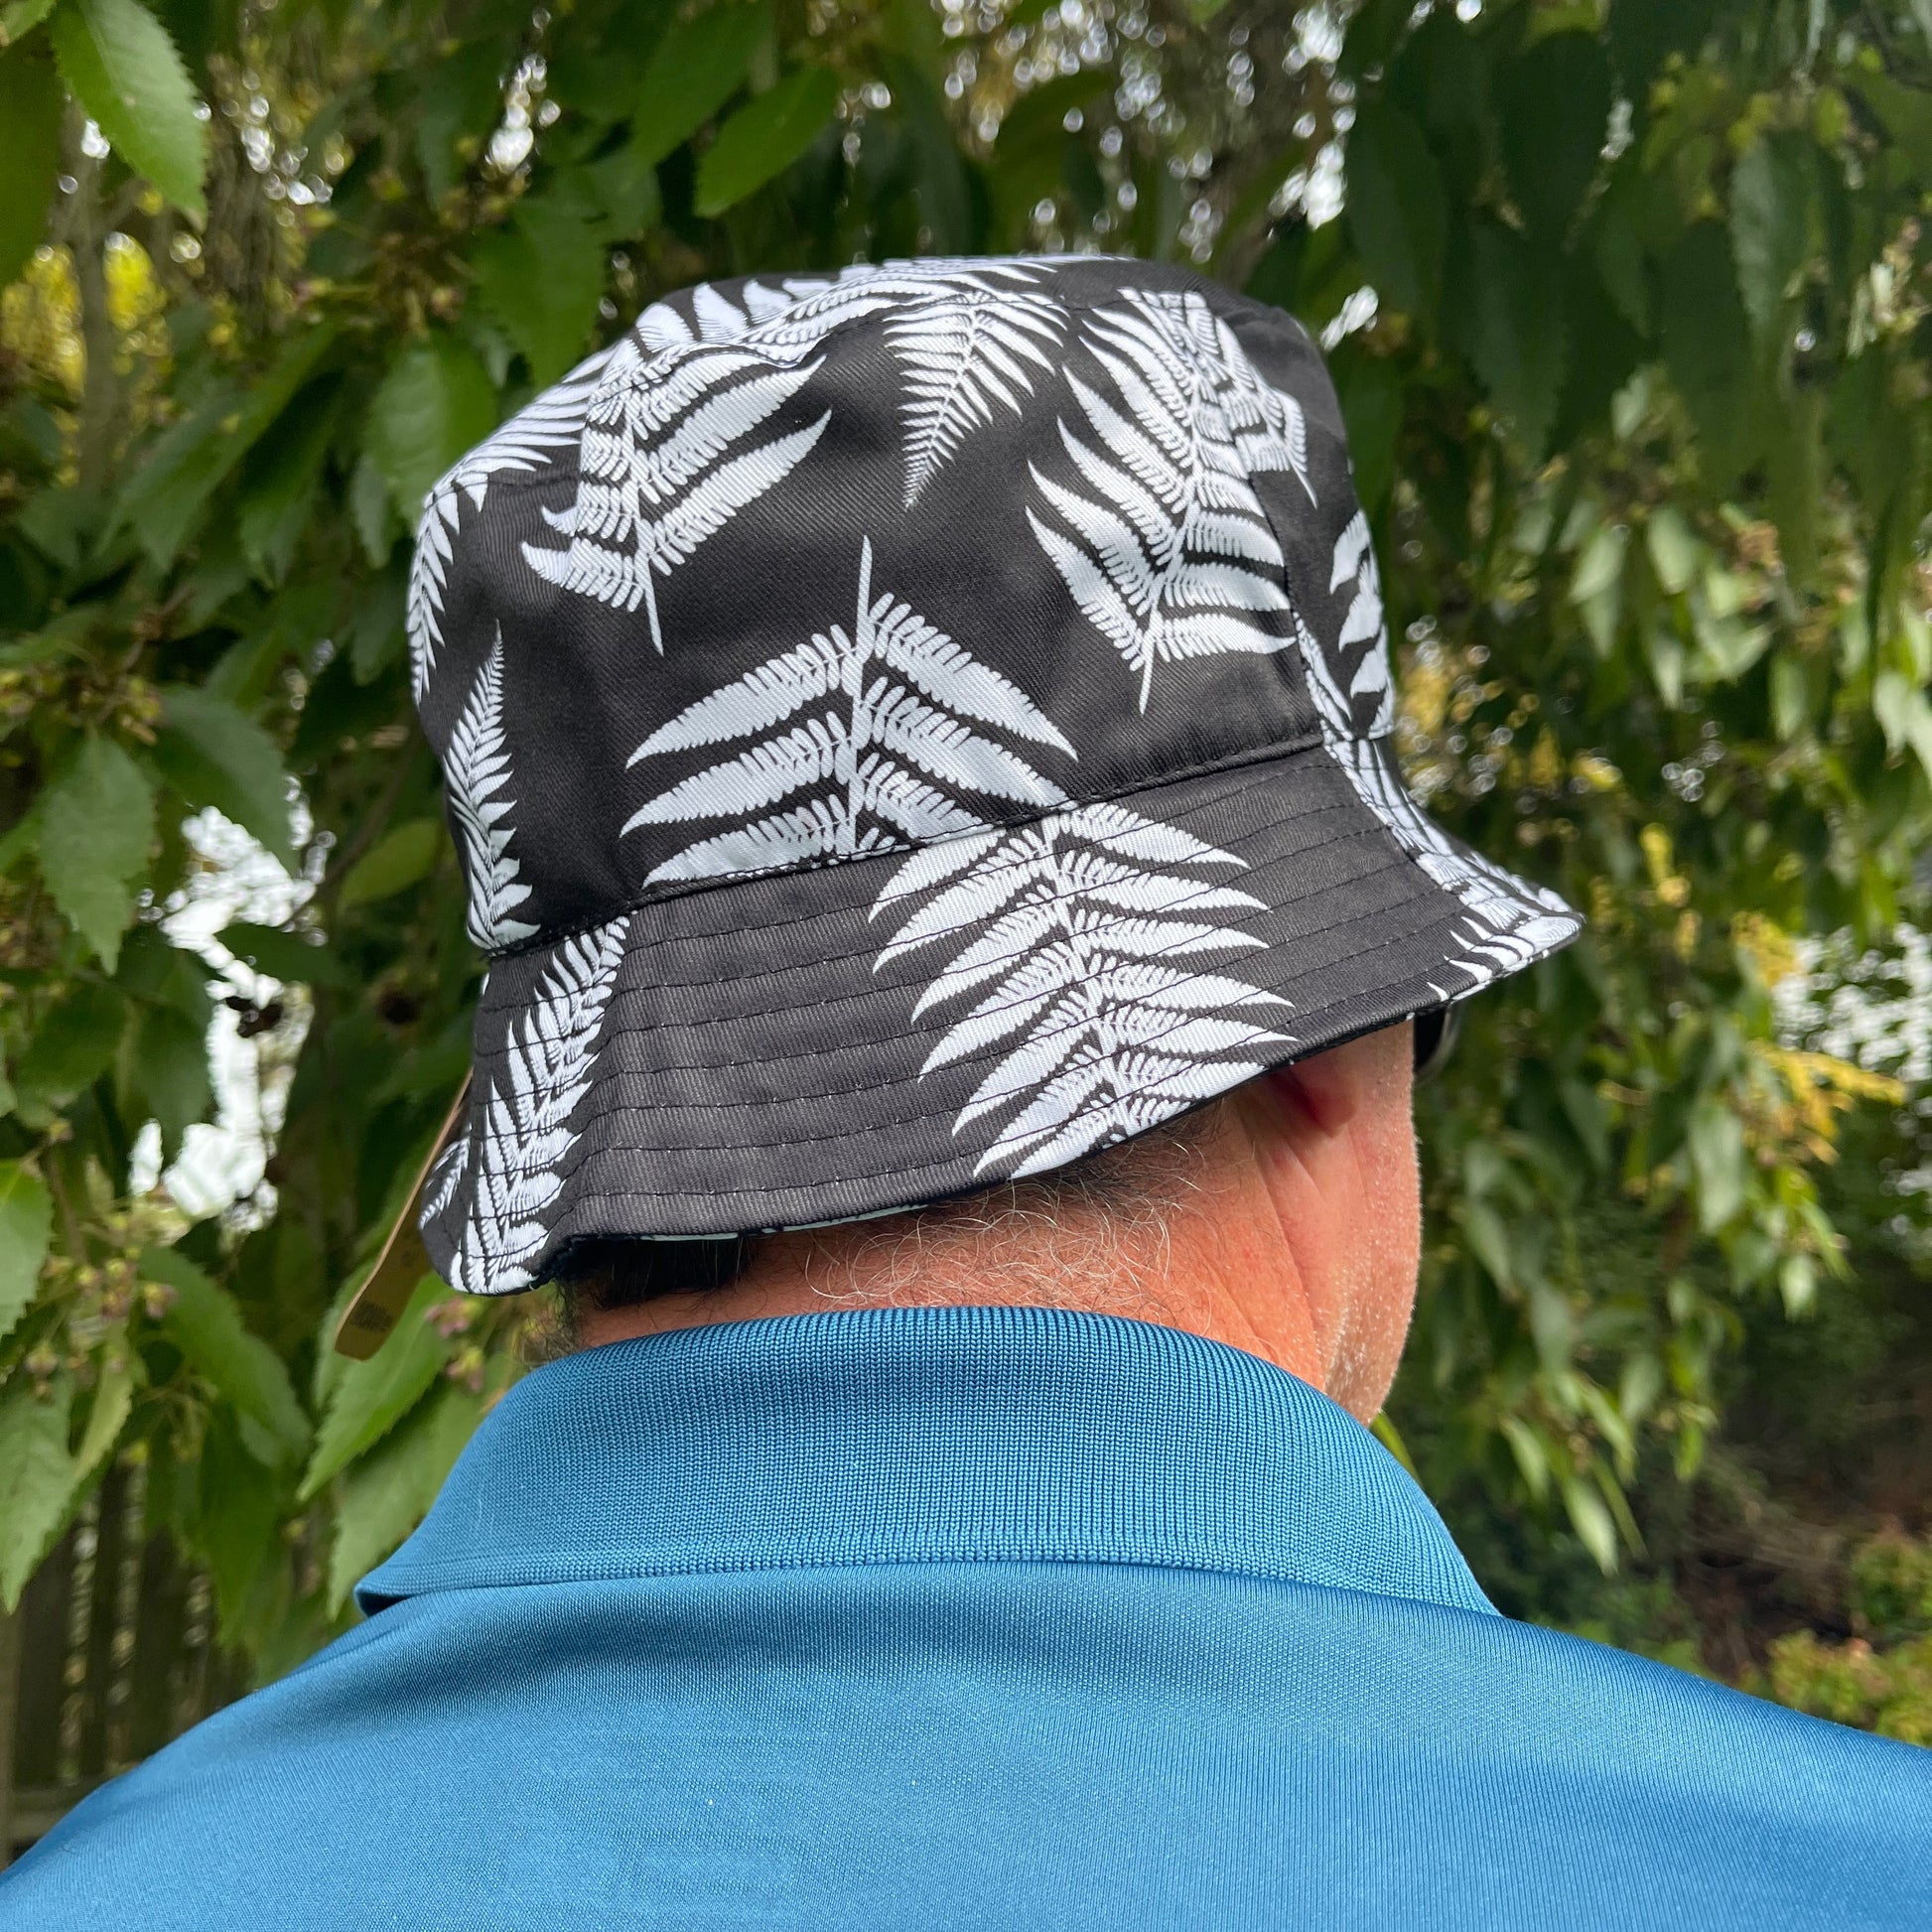 Back of mans head wearing a bucket hat in black with white ferns printed on it.